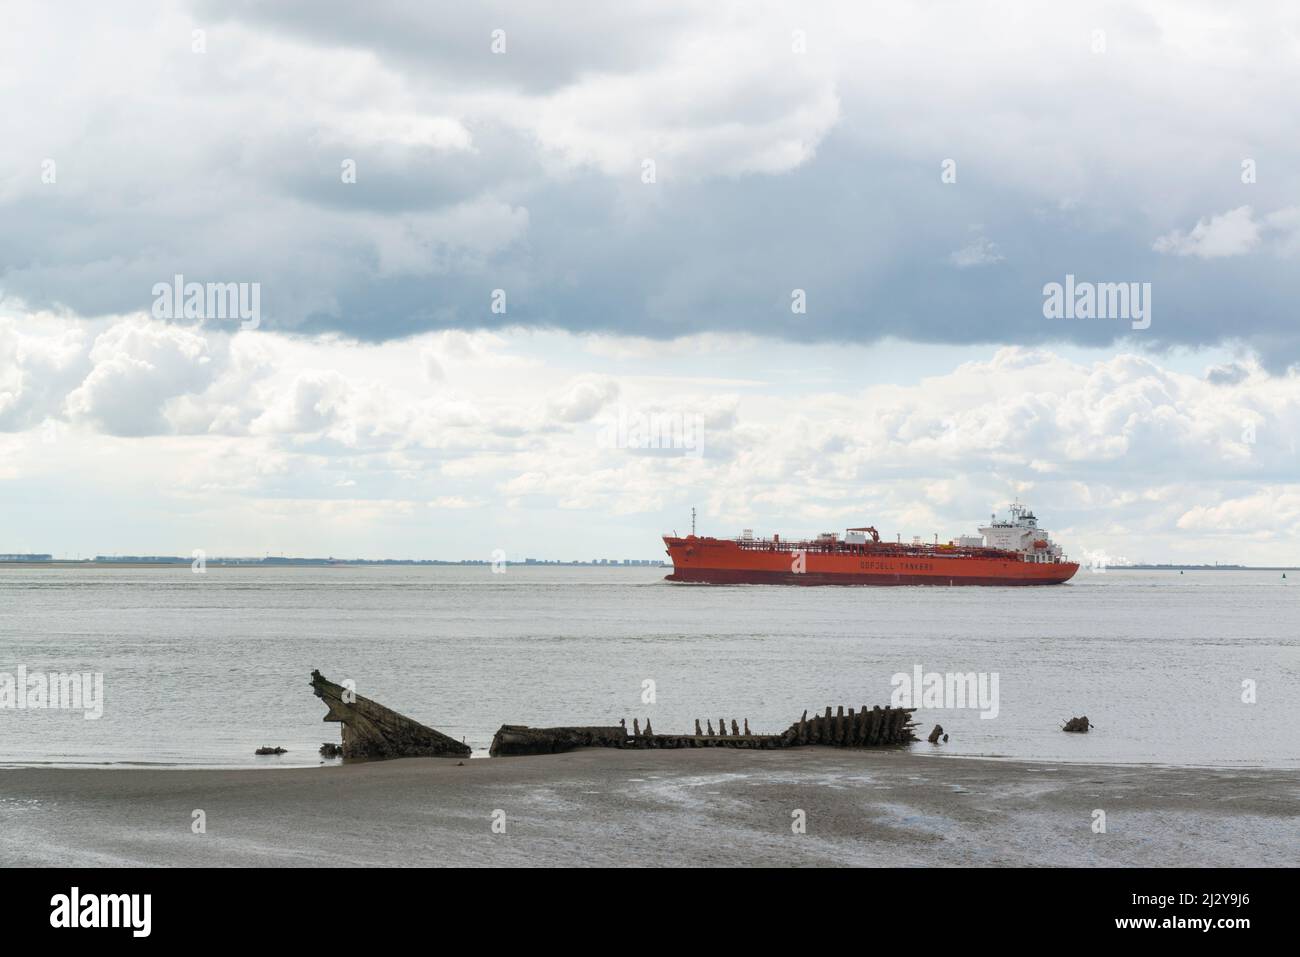 Tanker Bow Engineer of Odfjell Shipping on its way to Antwerp port passes a wooden ship wreck at the mudflats near Hansweert, Zeeland, Netherlands Stock Photo